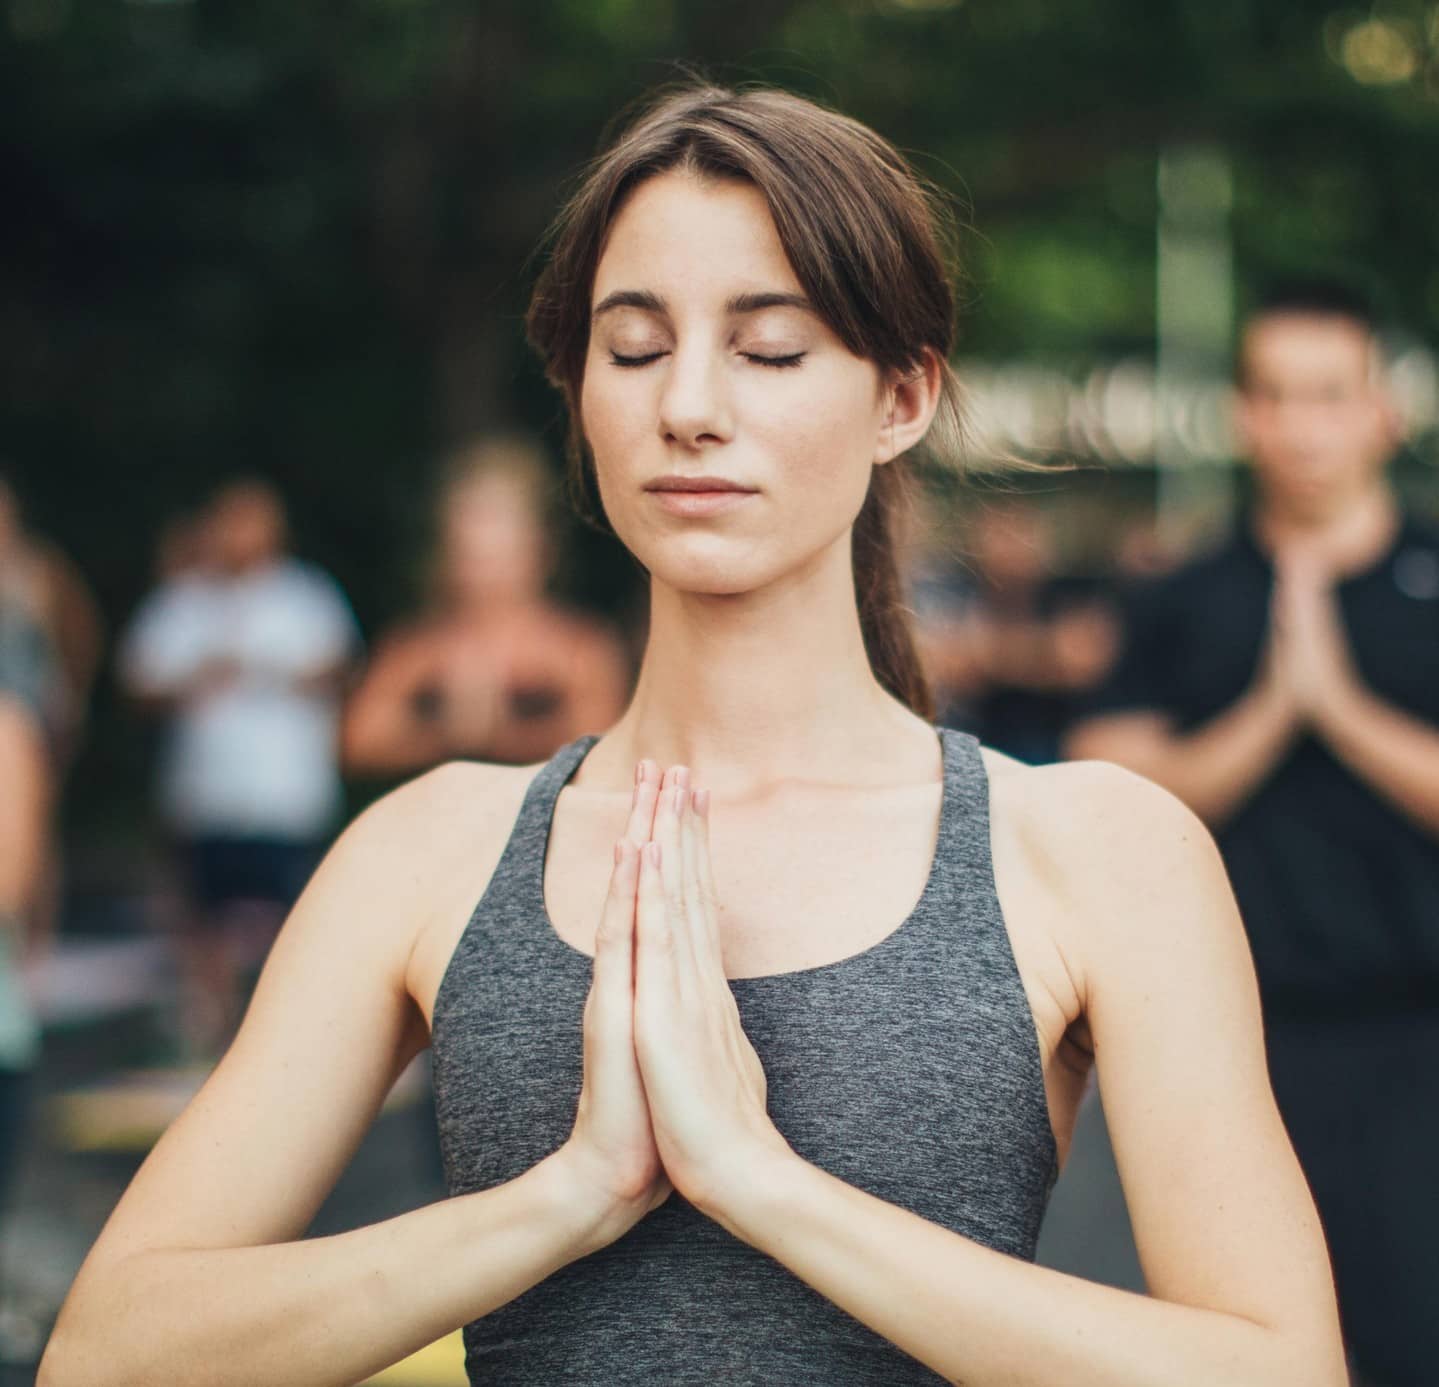 Get ready for yoga at Ward Village! CorePower Yoga will be bringing back their complimentary classes at the IBM Courtyard on Wednesdays from 5pm - 6pm starting August 2. Visit the link in our bio to reserve your spot!